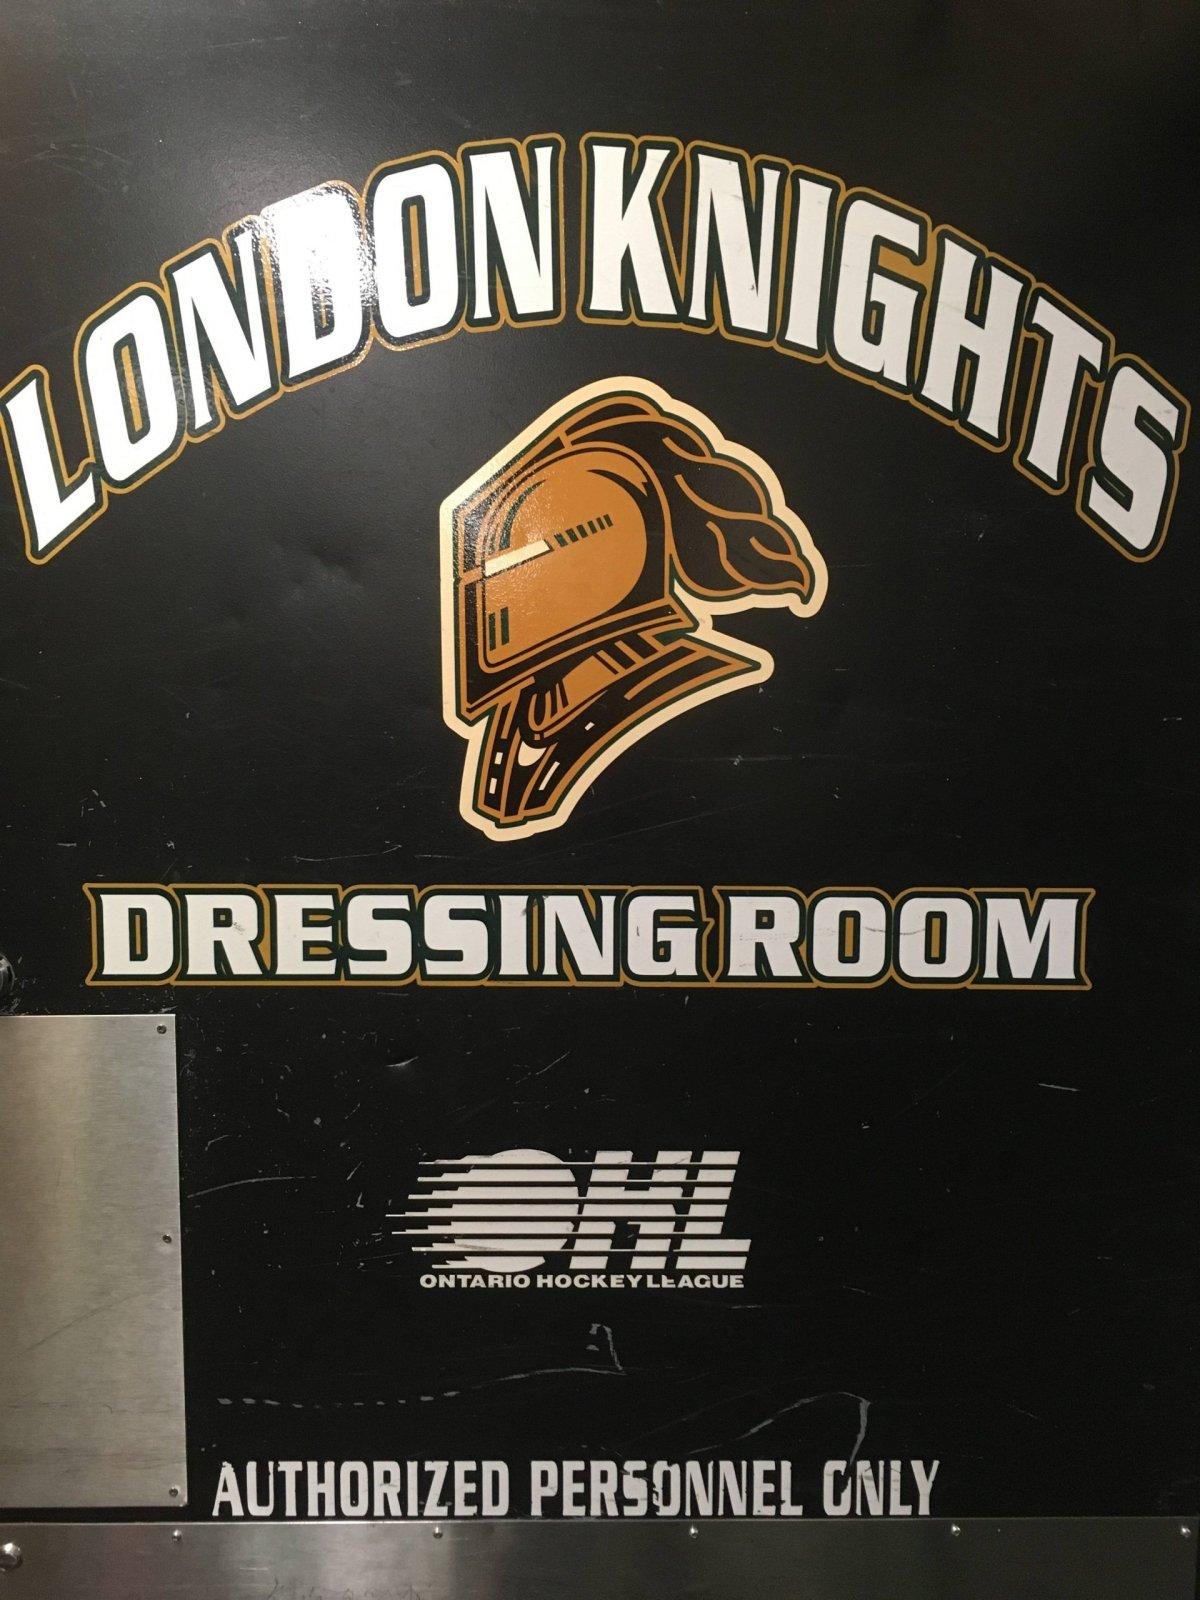 London Knights release 2018-19 OHL schedule - image